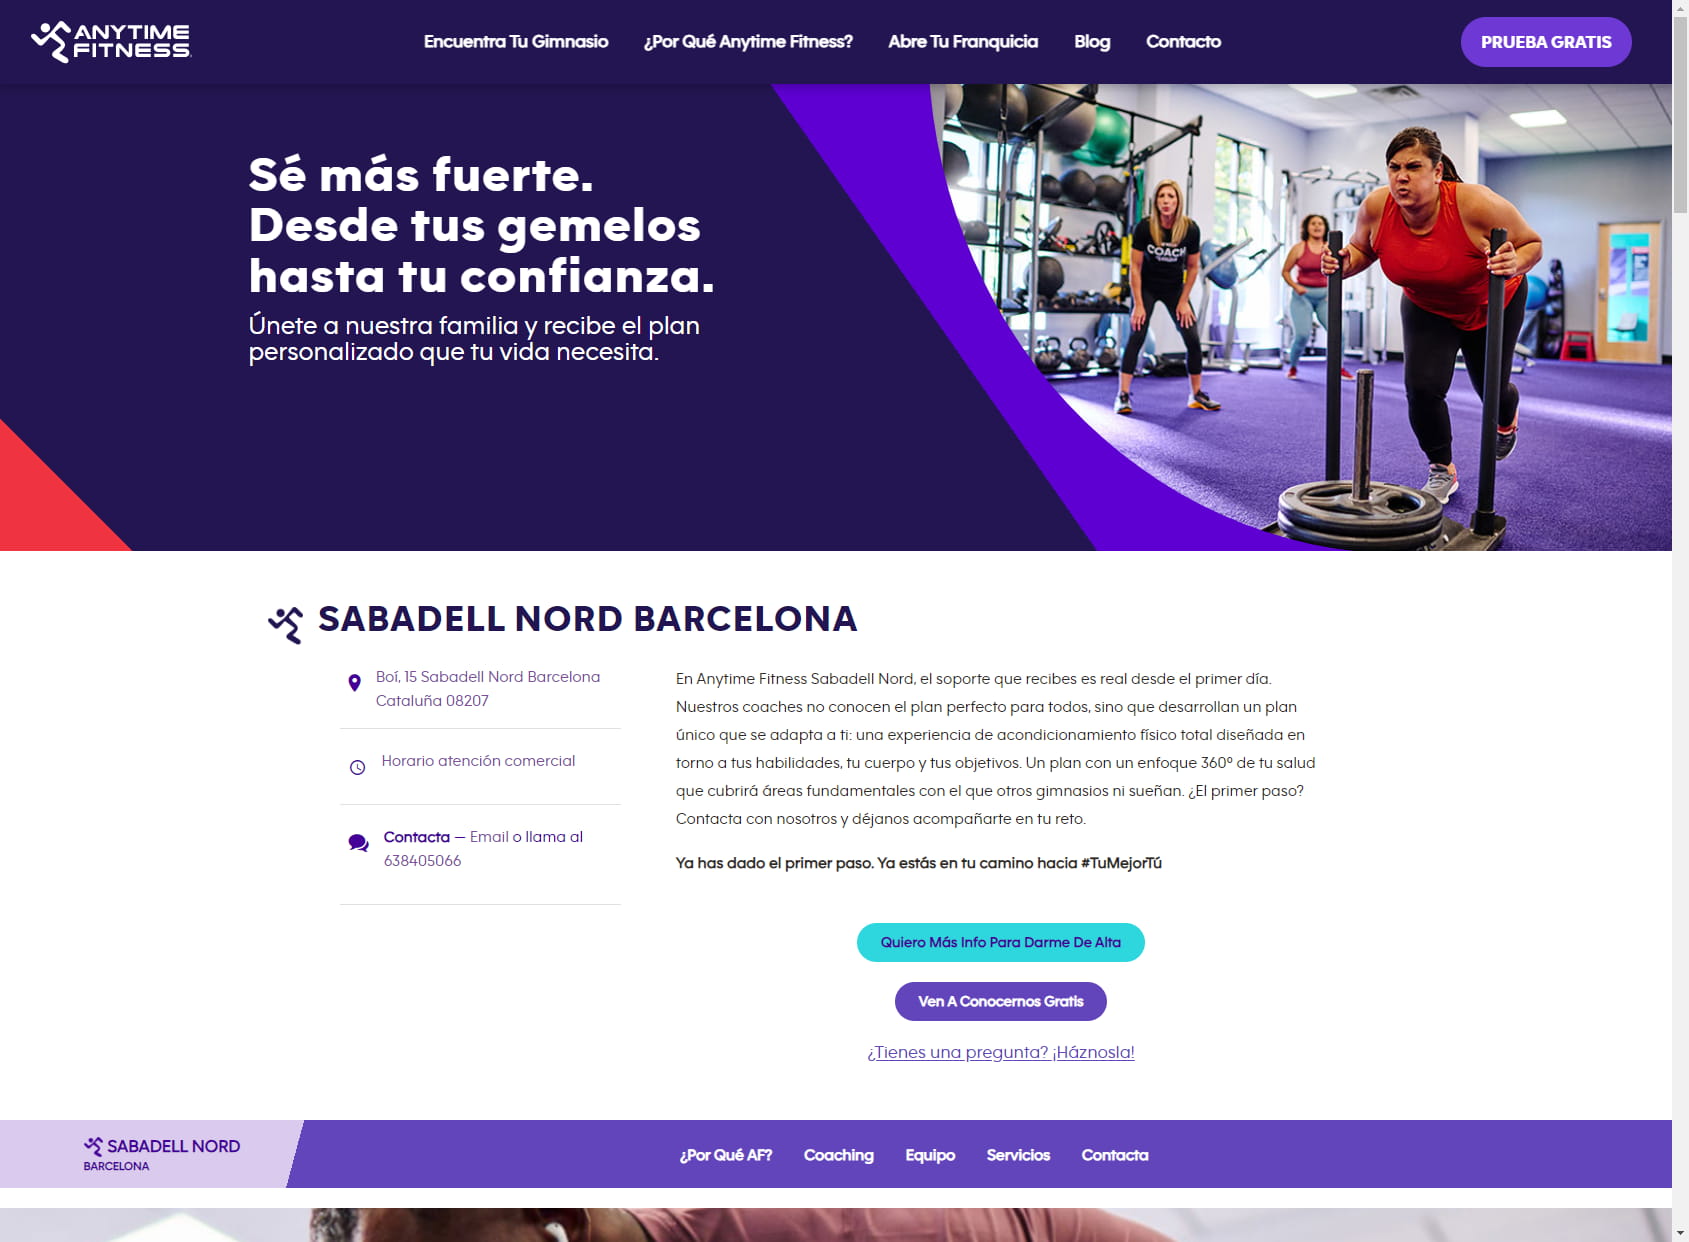 Anytime Fitness Nord Sabadell